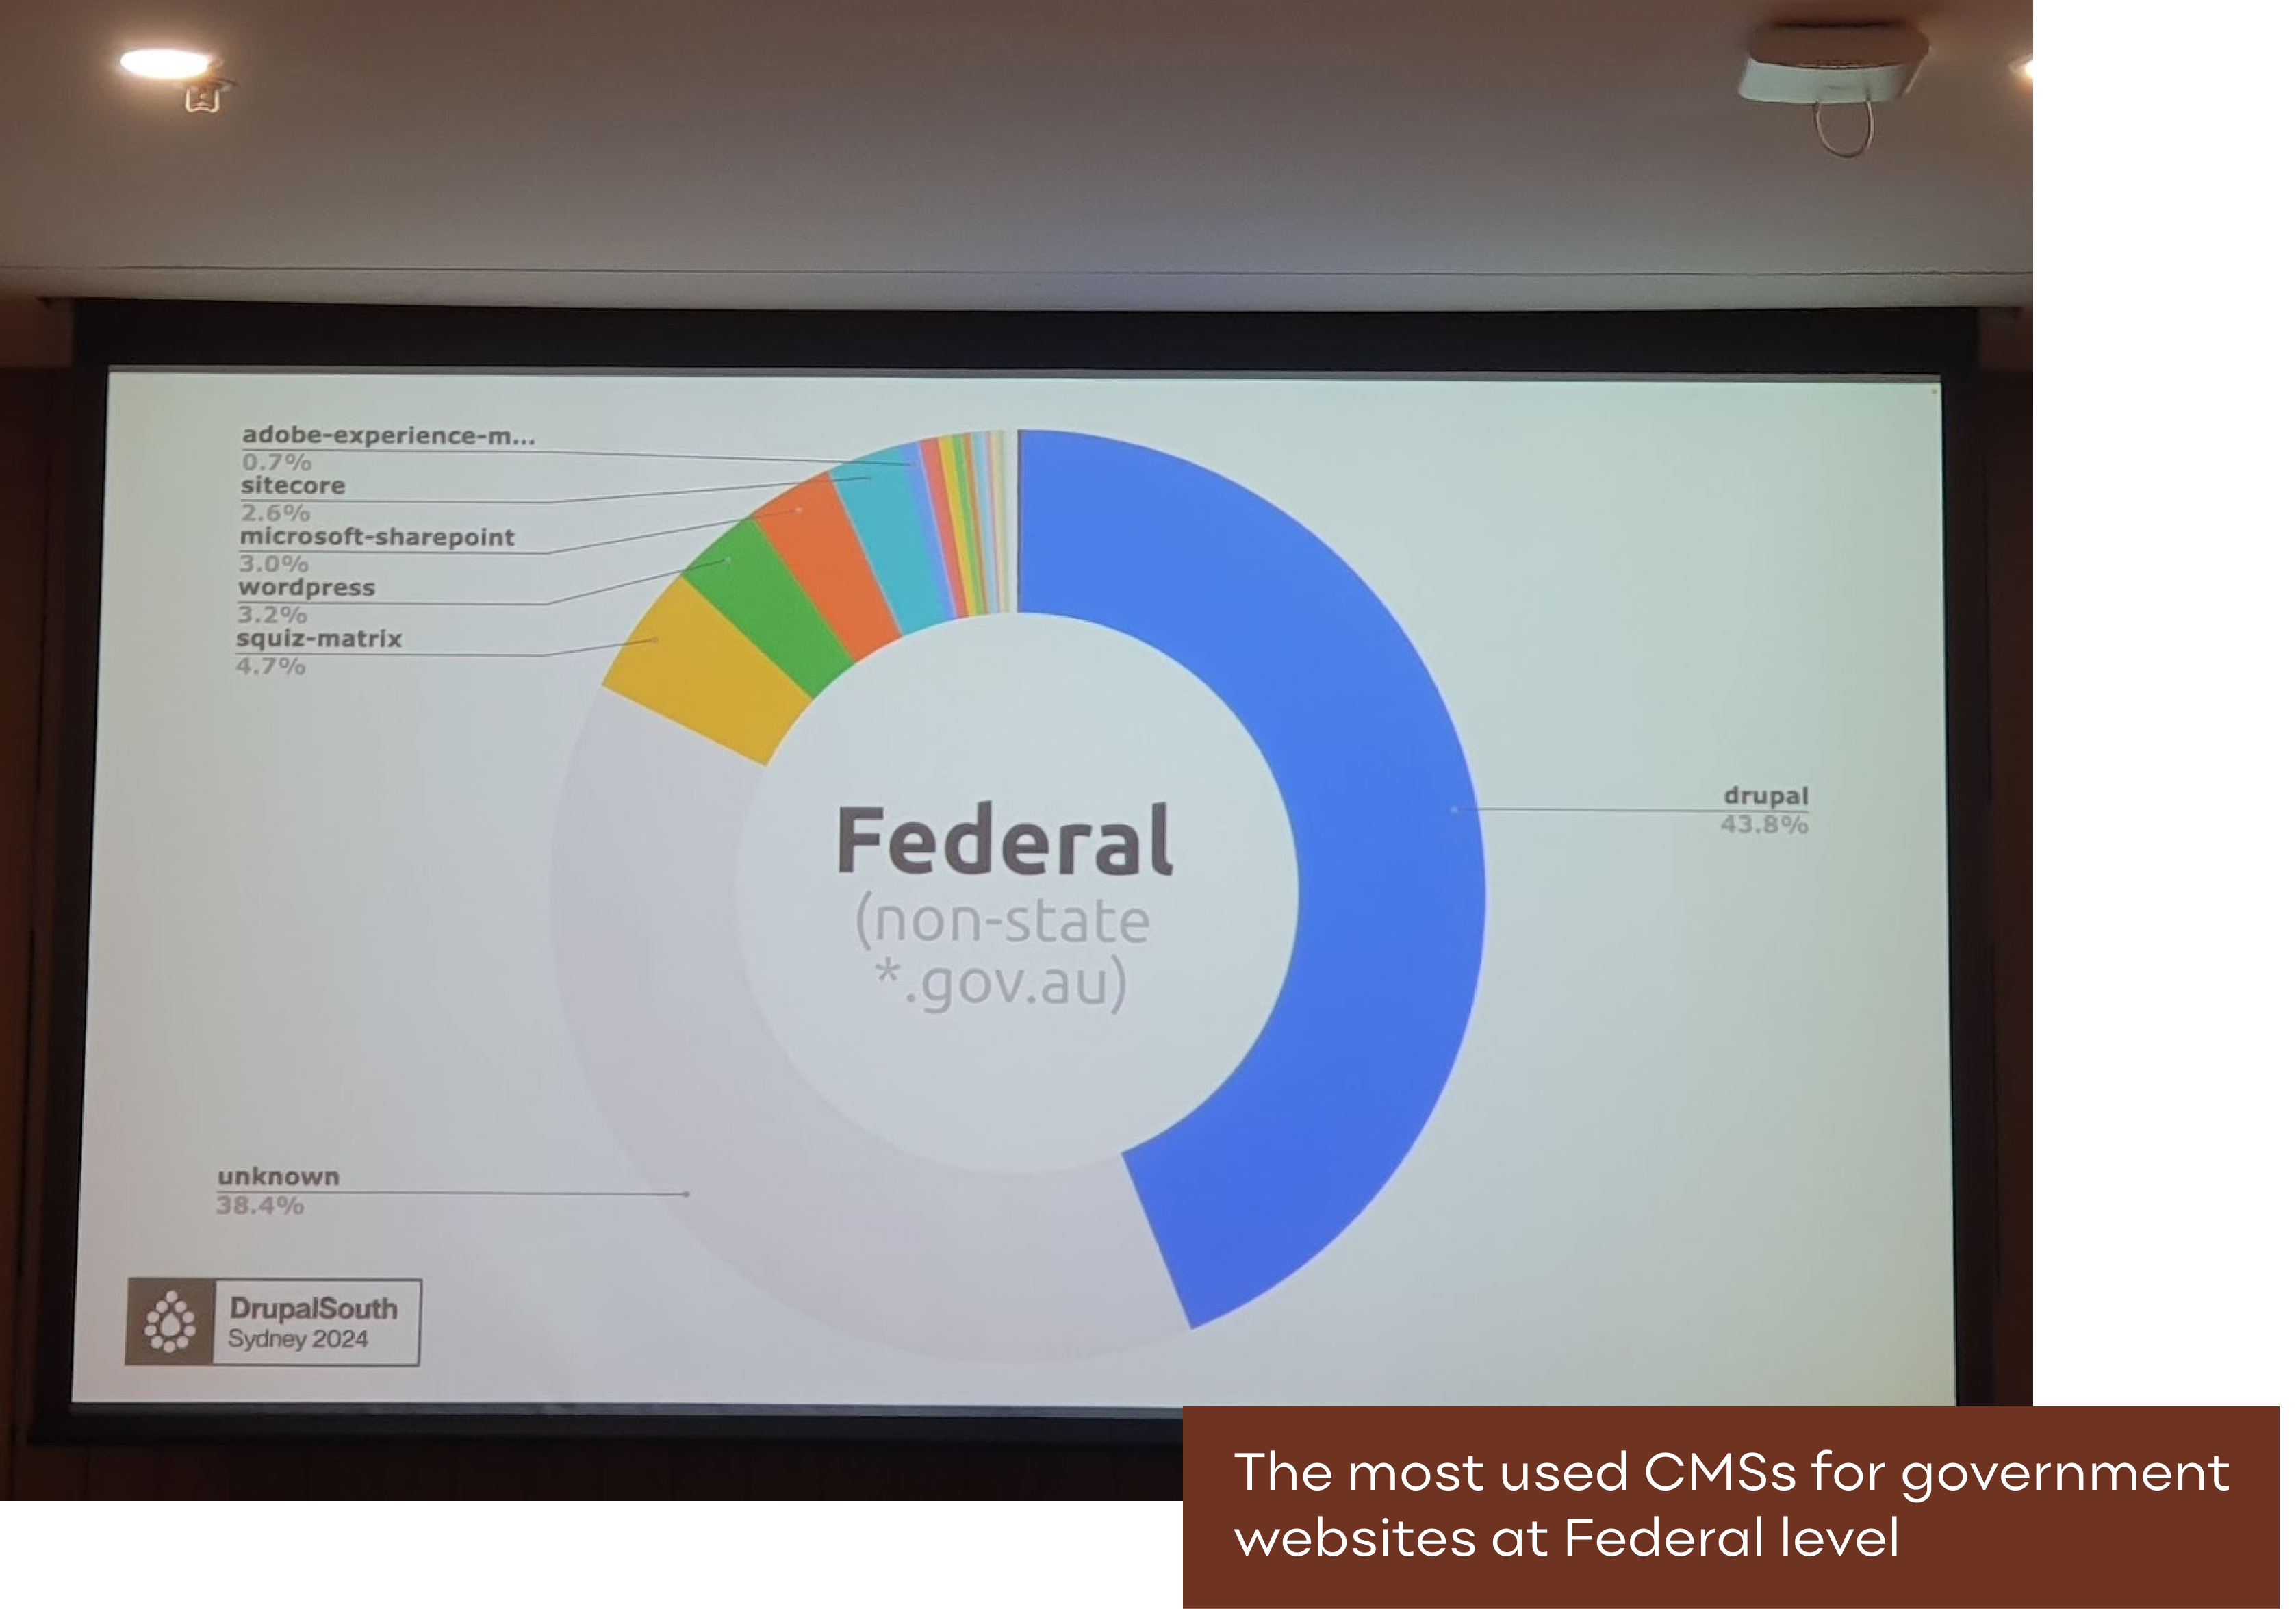 The most used CMSs by the government in Federal level